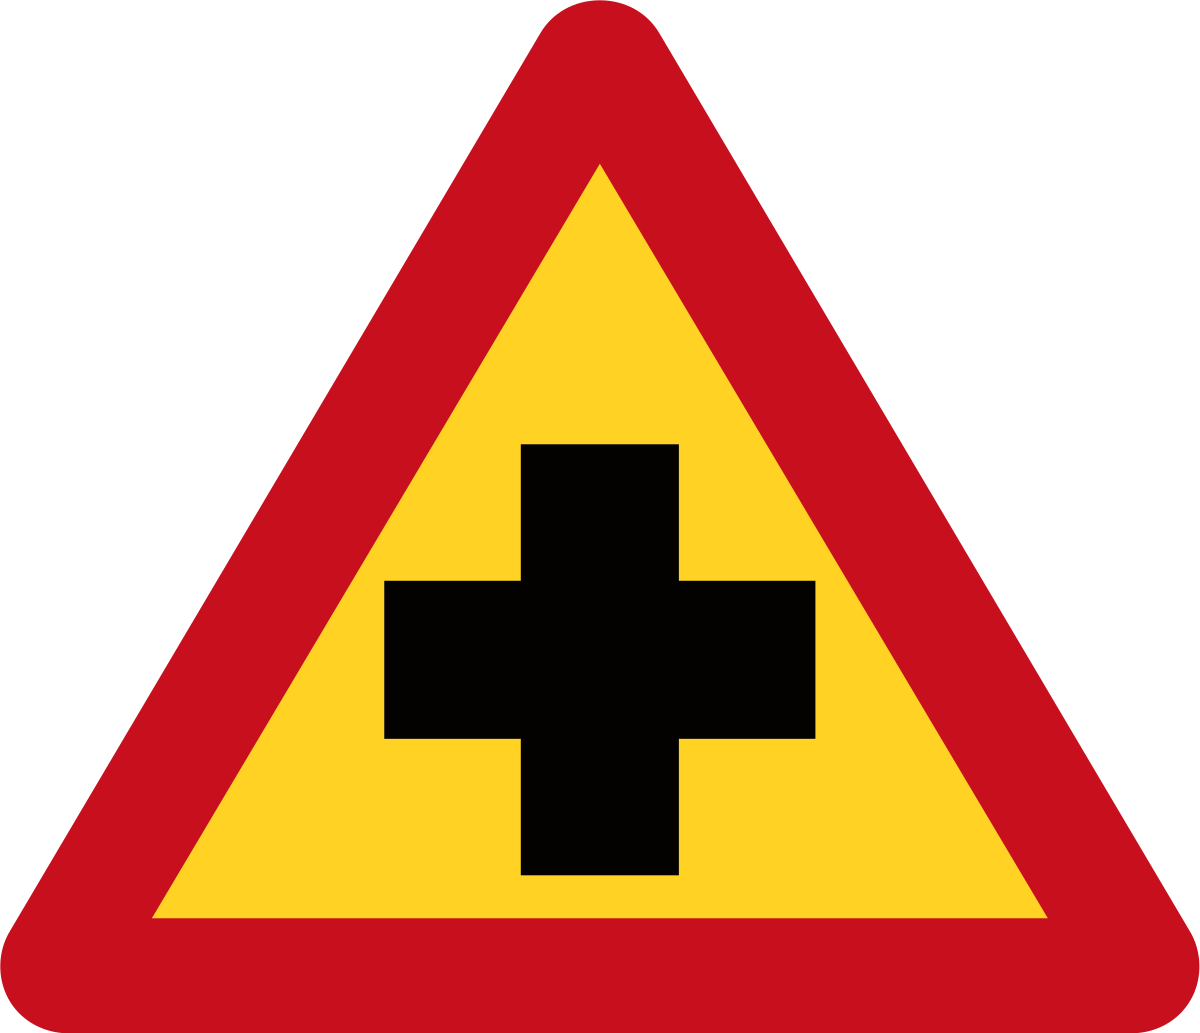 A Red And Yellow Triangle Sign With A Black Cross